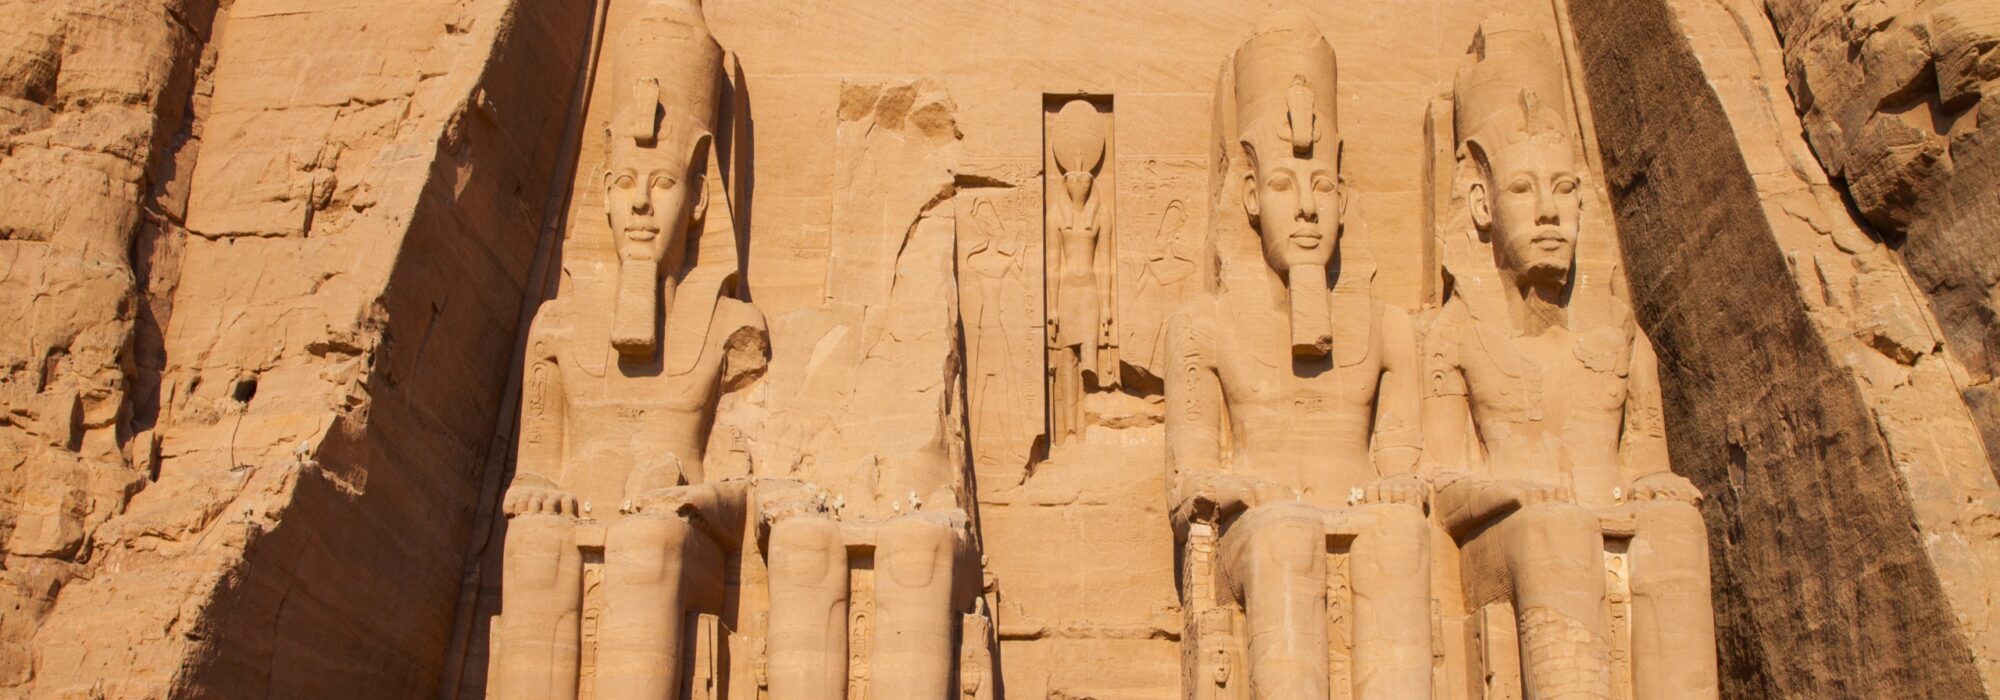 Abu Simbel travel agents packages deals